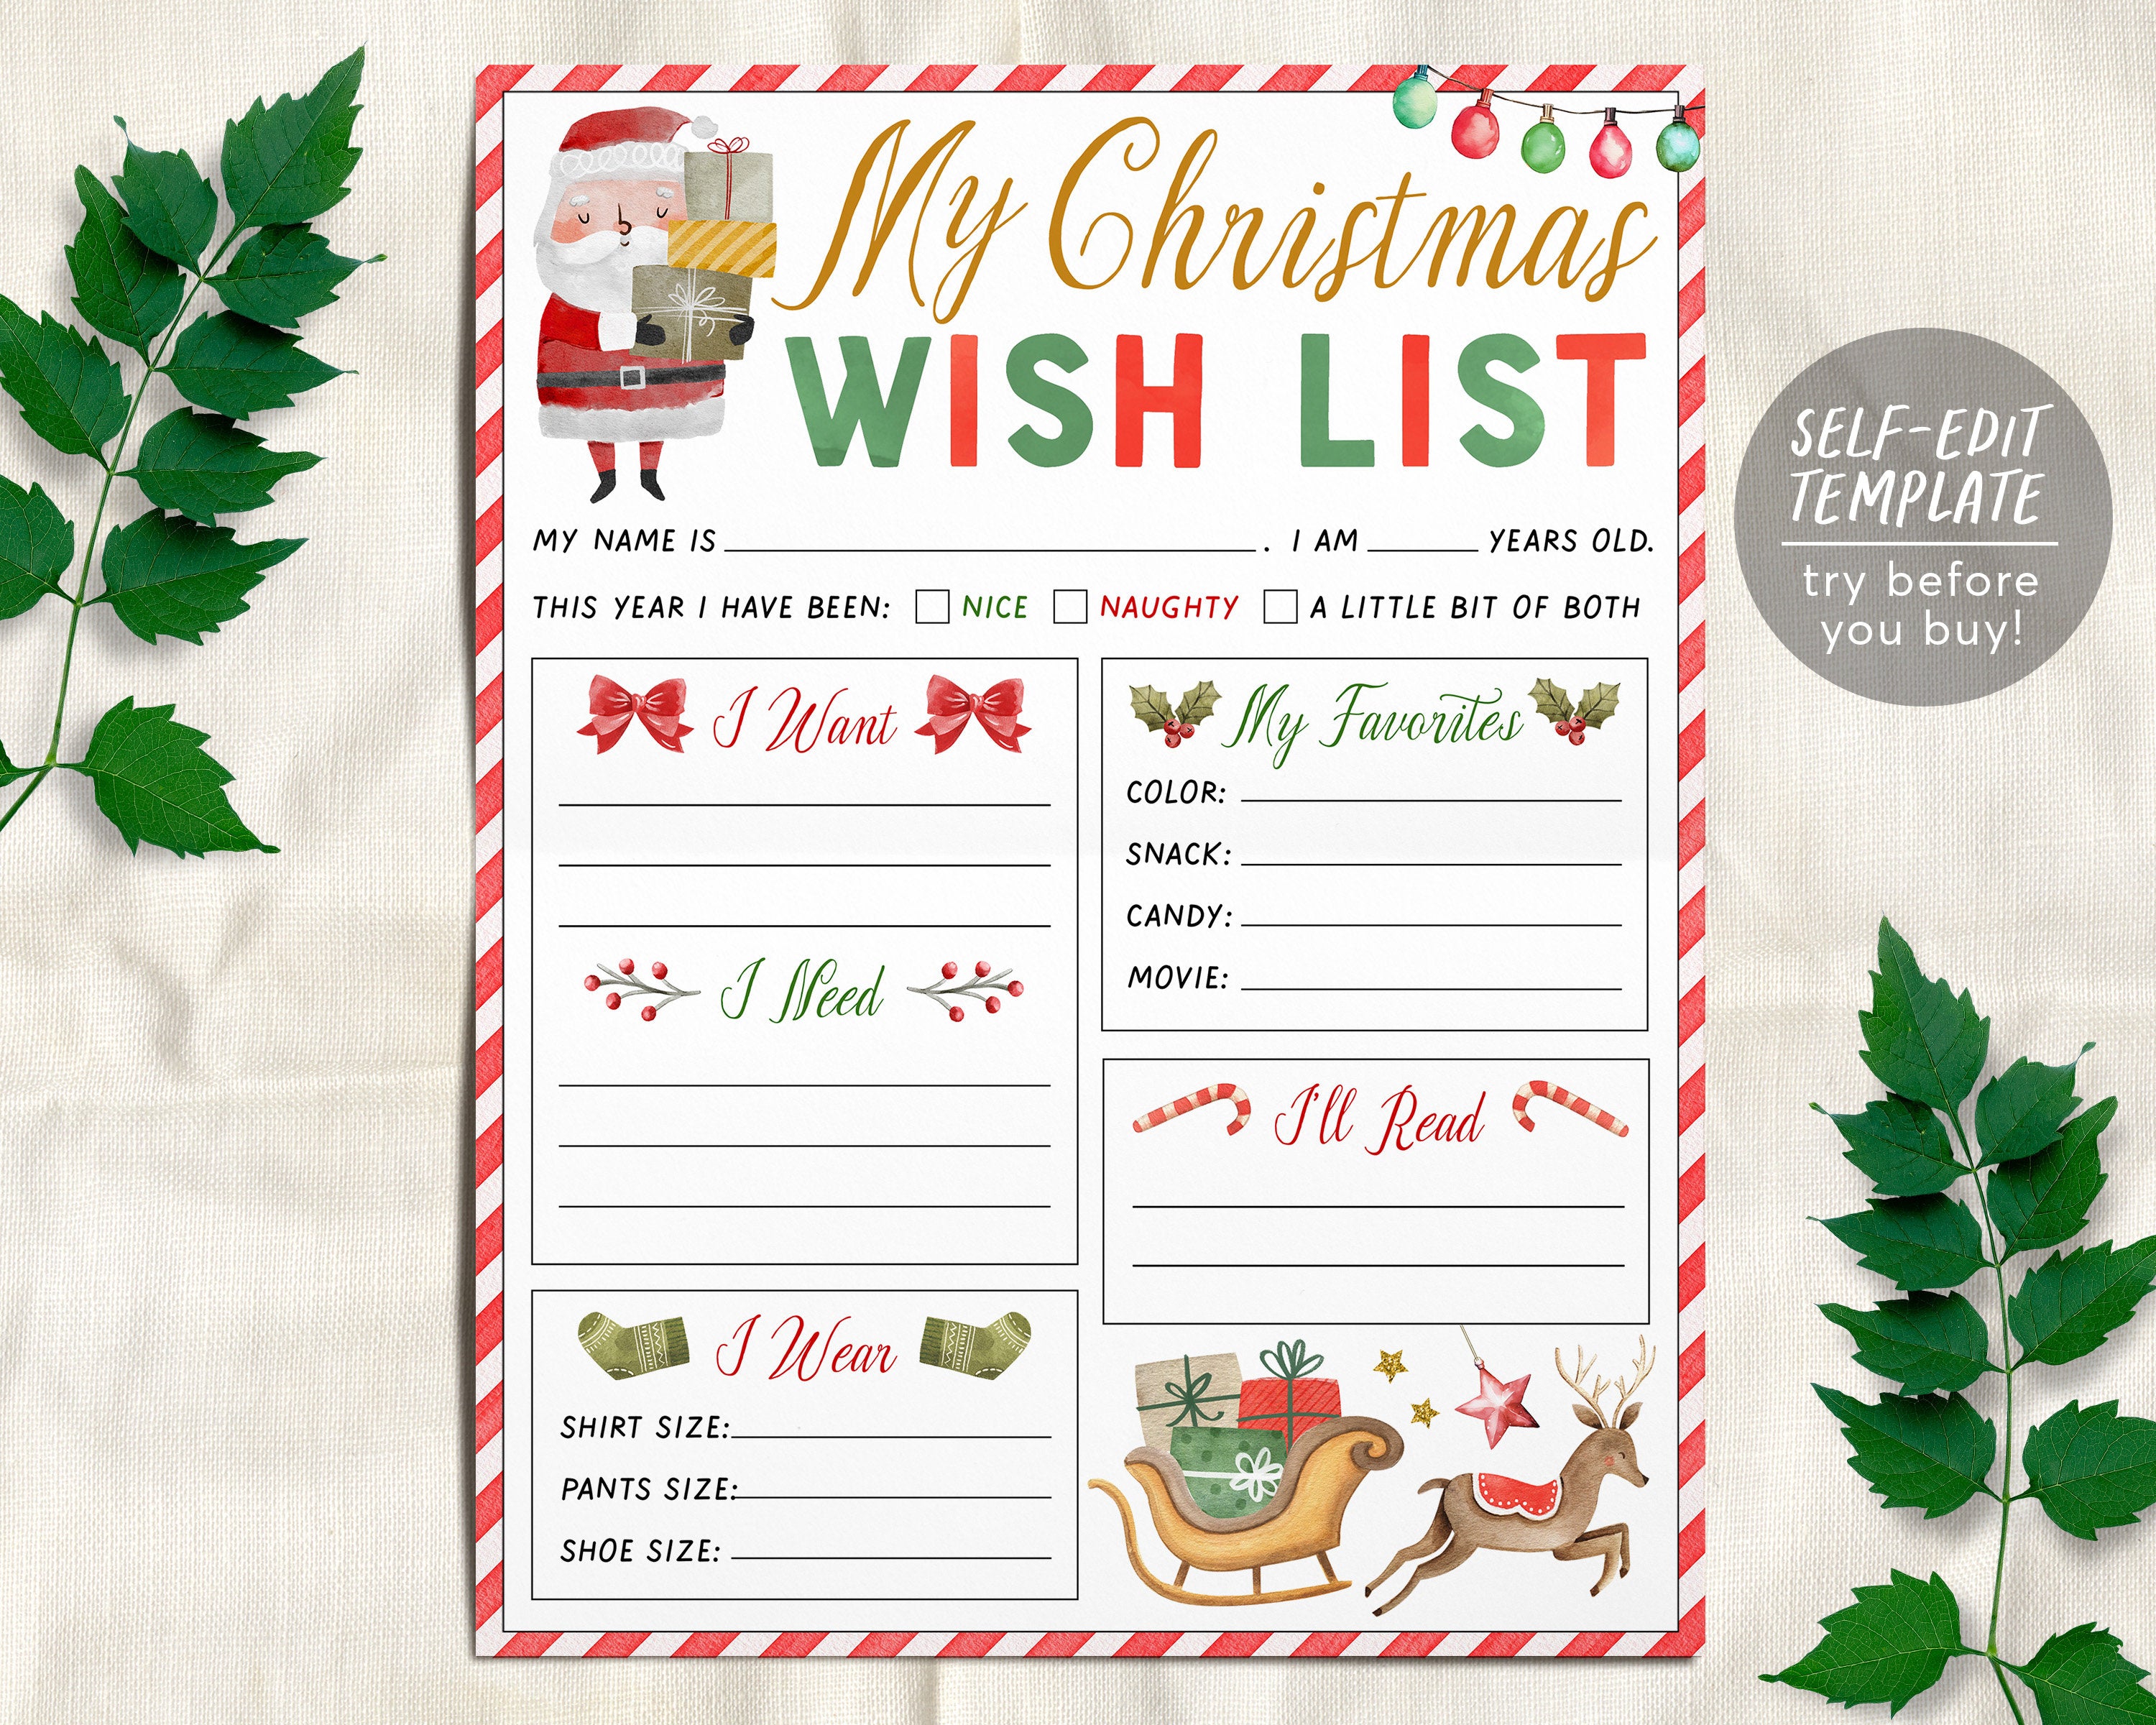 Christmas Wish List For Kids Editable Template, Personalized